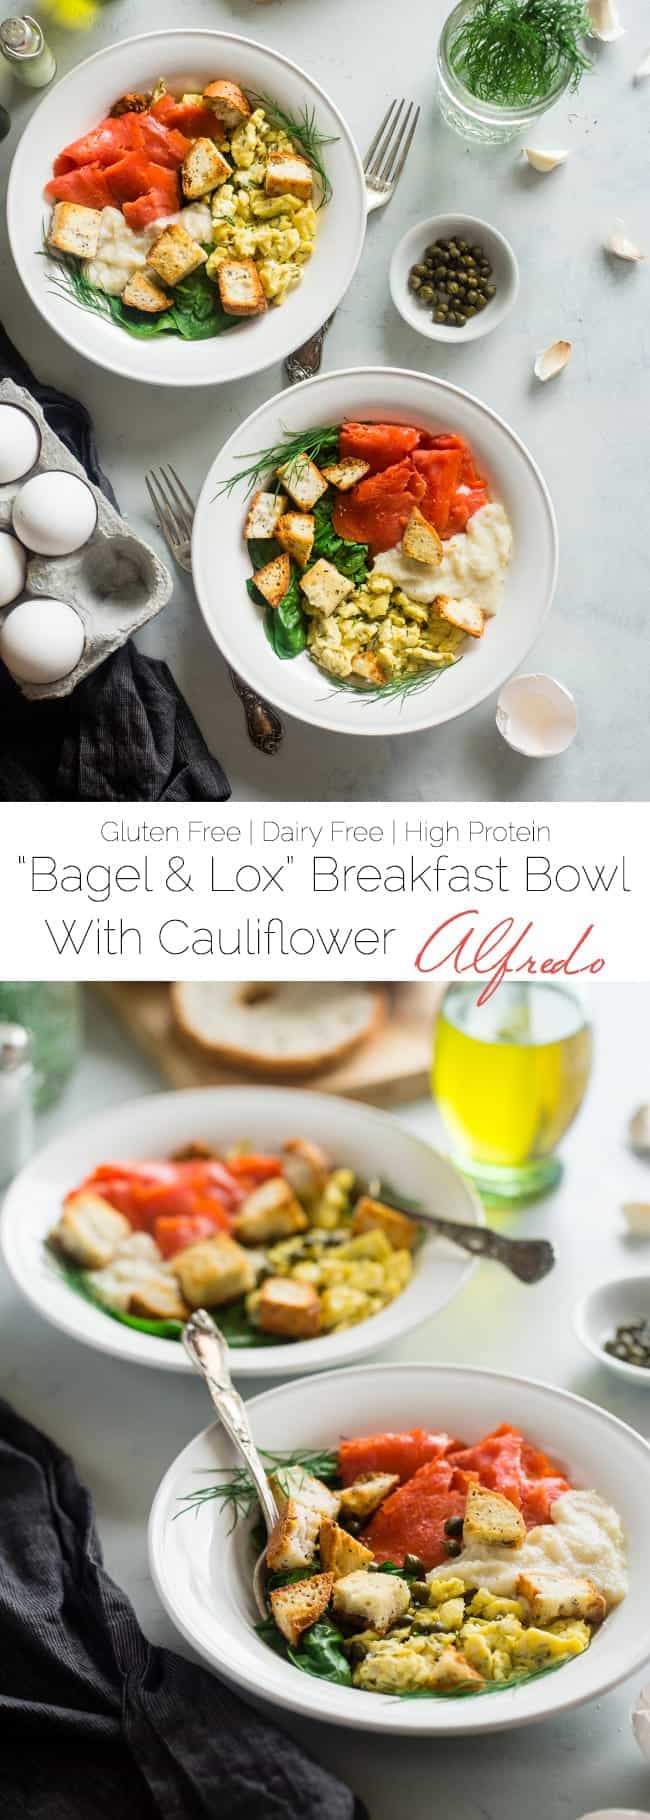 Gluten Free Cauliflower Alfredo "Lox Bagel" Breakfast Bowls - These bowls are a spin on the classic lox bagel, and use cauliflower Alfredo instead of cream cheese to keep them dairy free, healthy and loaded with hidden veggies! | Foodfaithfitness.com | @FoodFaithFit